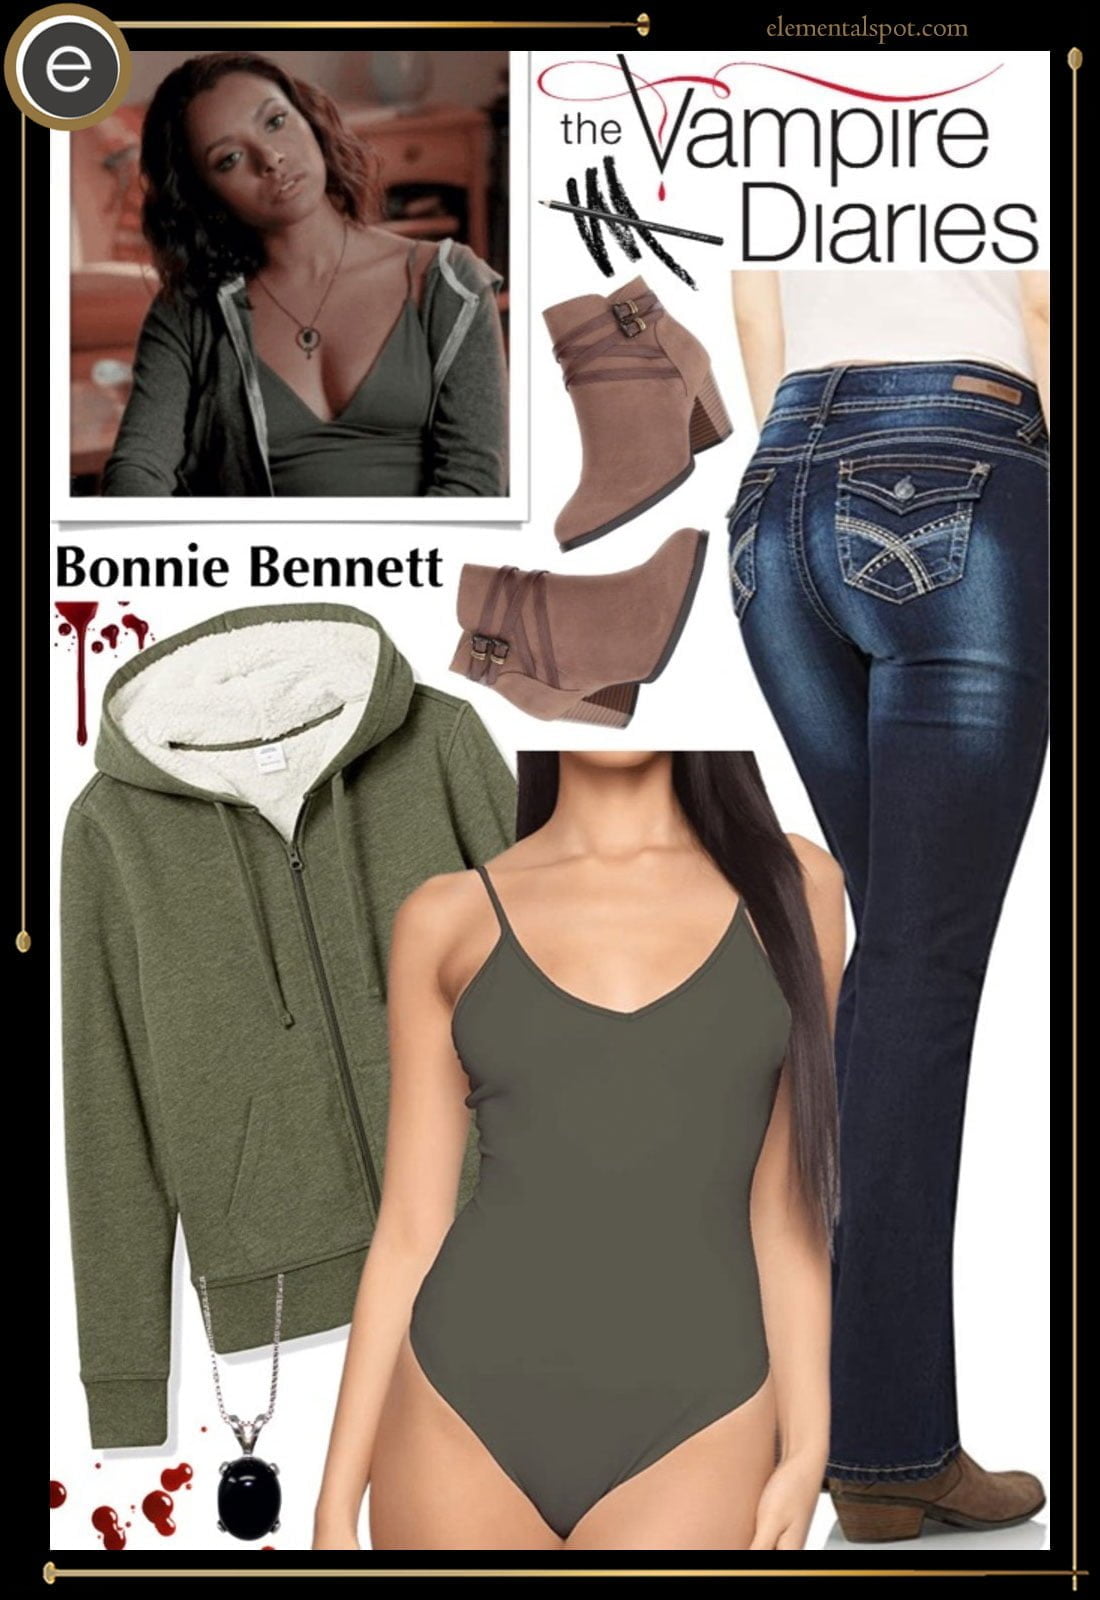 Steal The Look Dress Like Bonnie Bennett From The Vampire Diaries